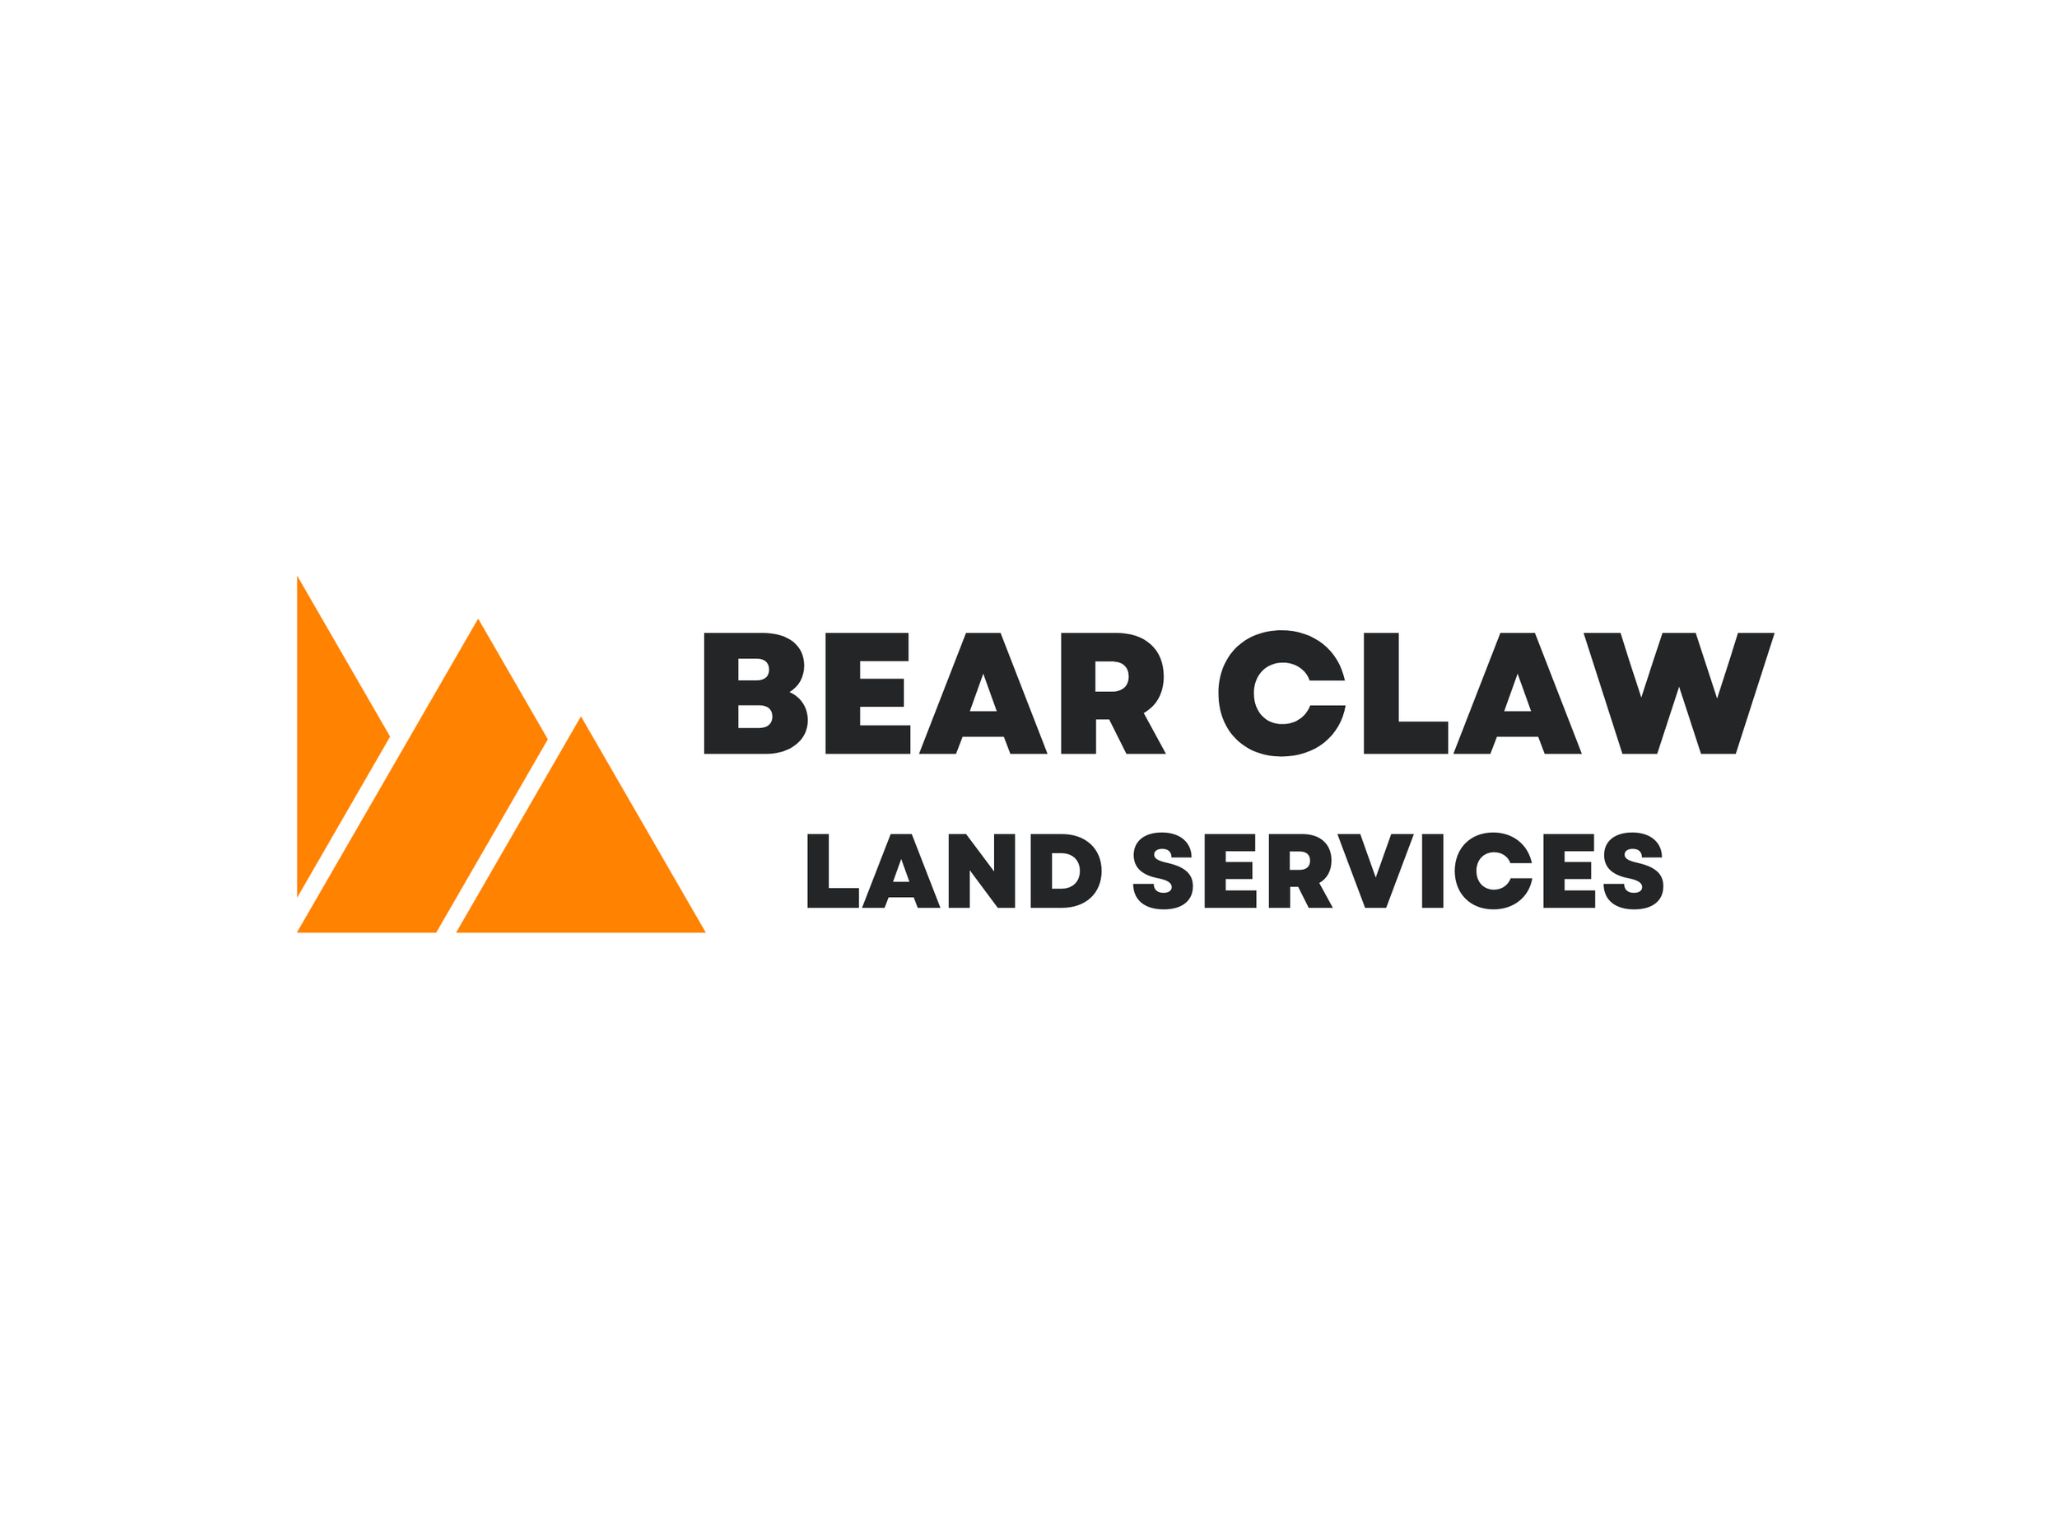  Bear Claw Land Services